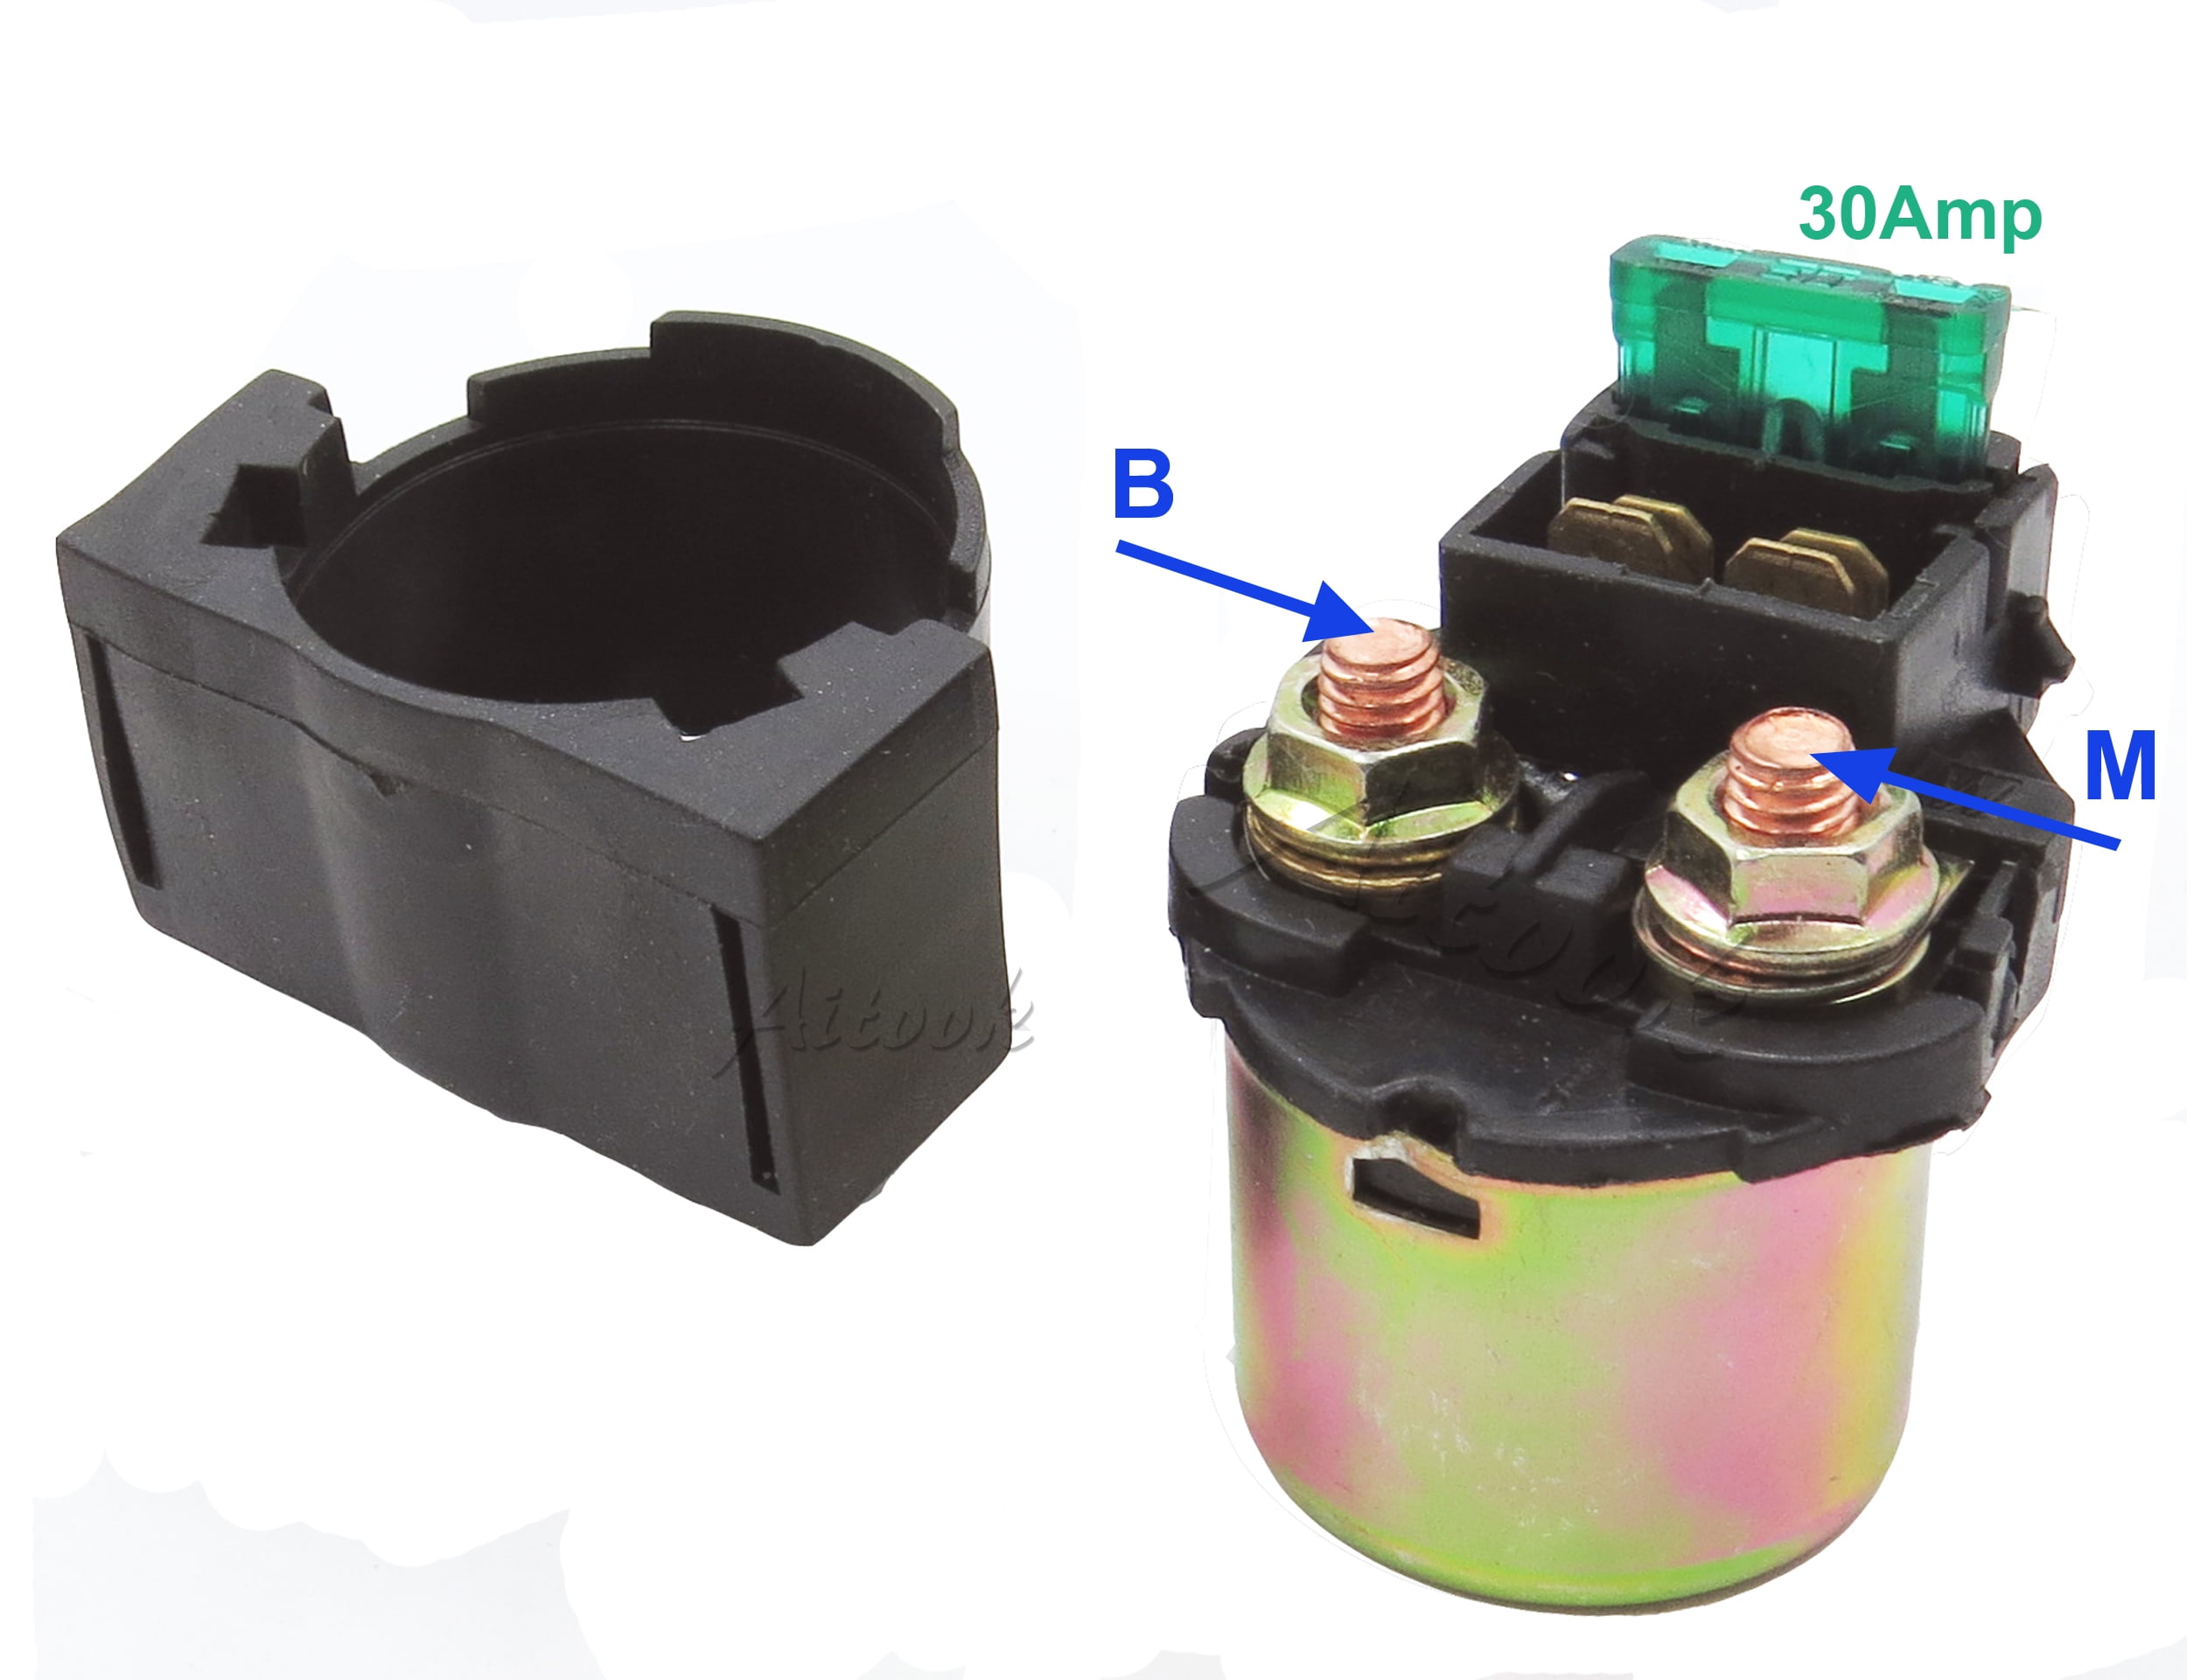 PROCOMPANY Starter Relay Solenoid Replaces FOR Kawasaki VN1500 VN 1500 Vulcan 1996 1997 1998 1999 